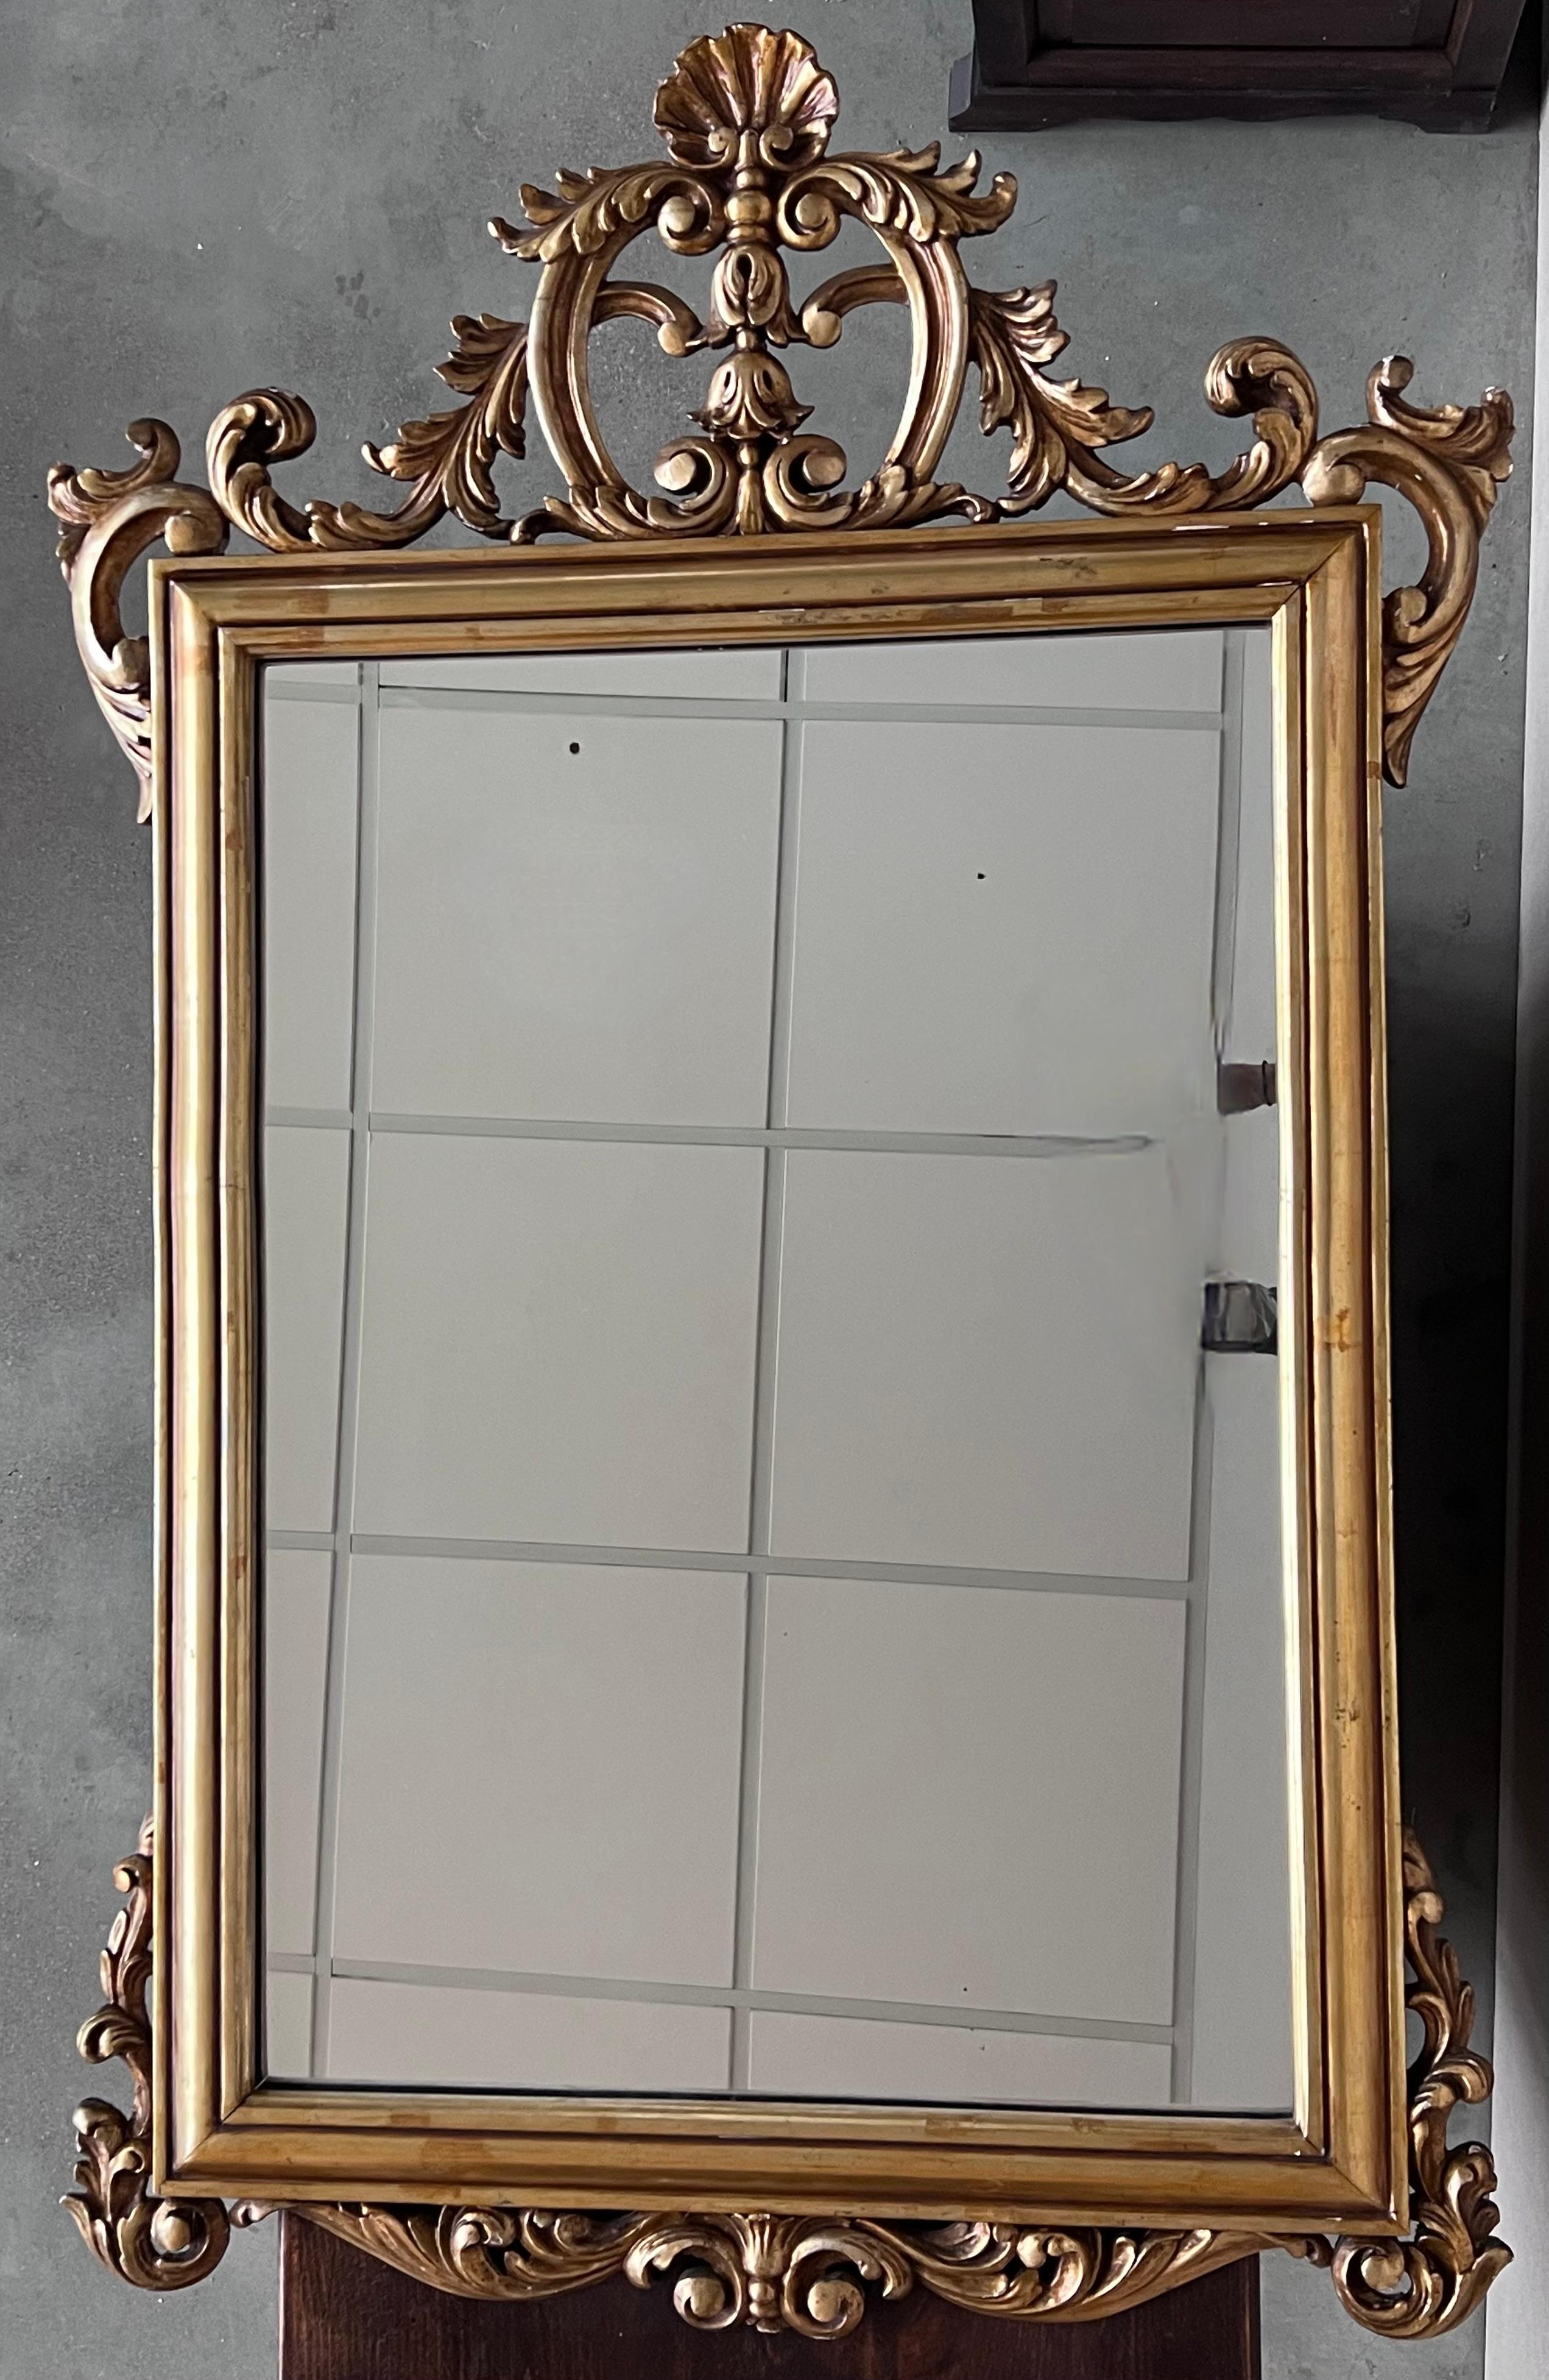 20th French Empire period carved gilt wood rectangular mirror
An exceptional hand carved and gilded Italian mirror. Highly carved with flowers , original glass (possibly re-silvered) and original wood backs. Italy, 20th century.